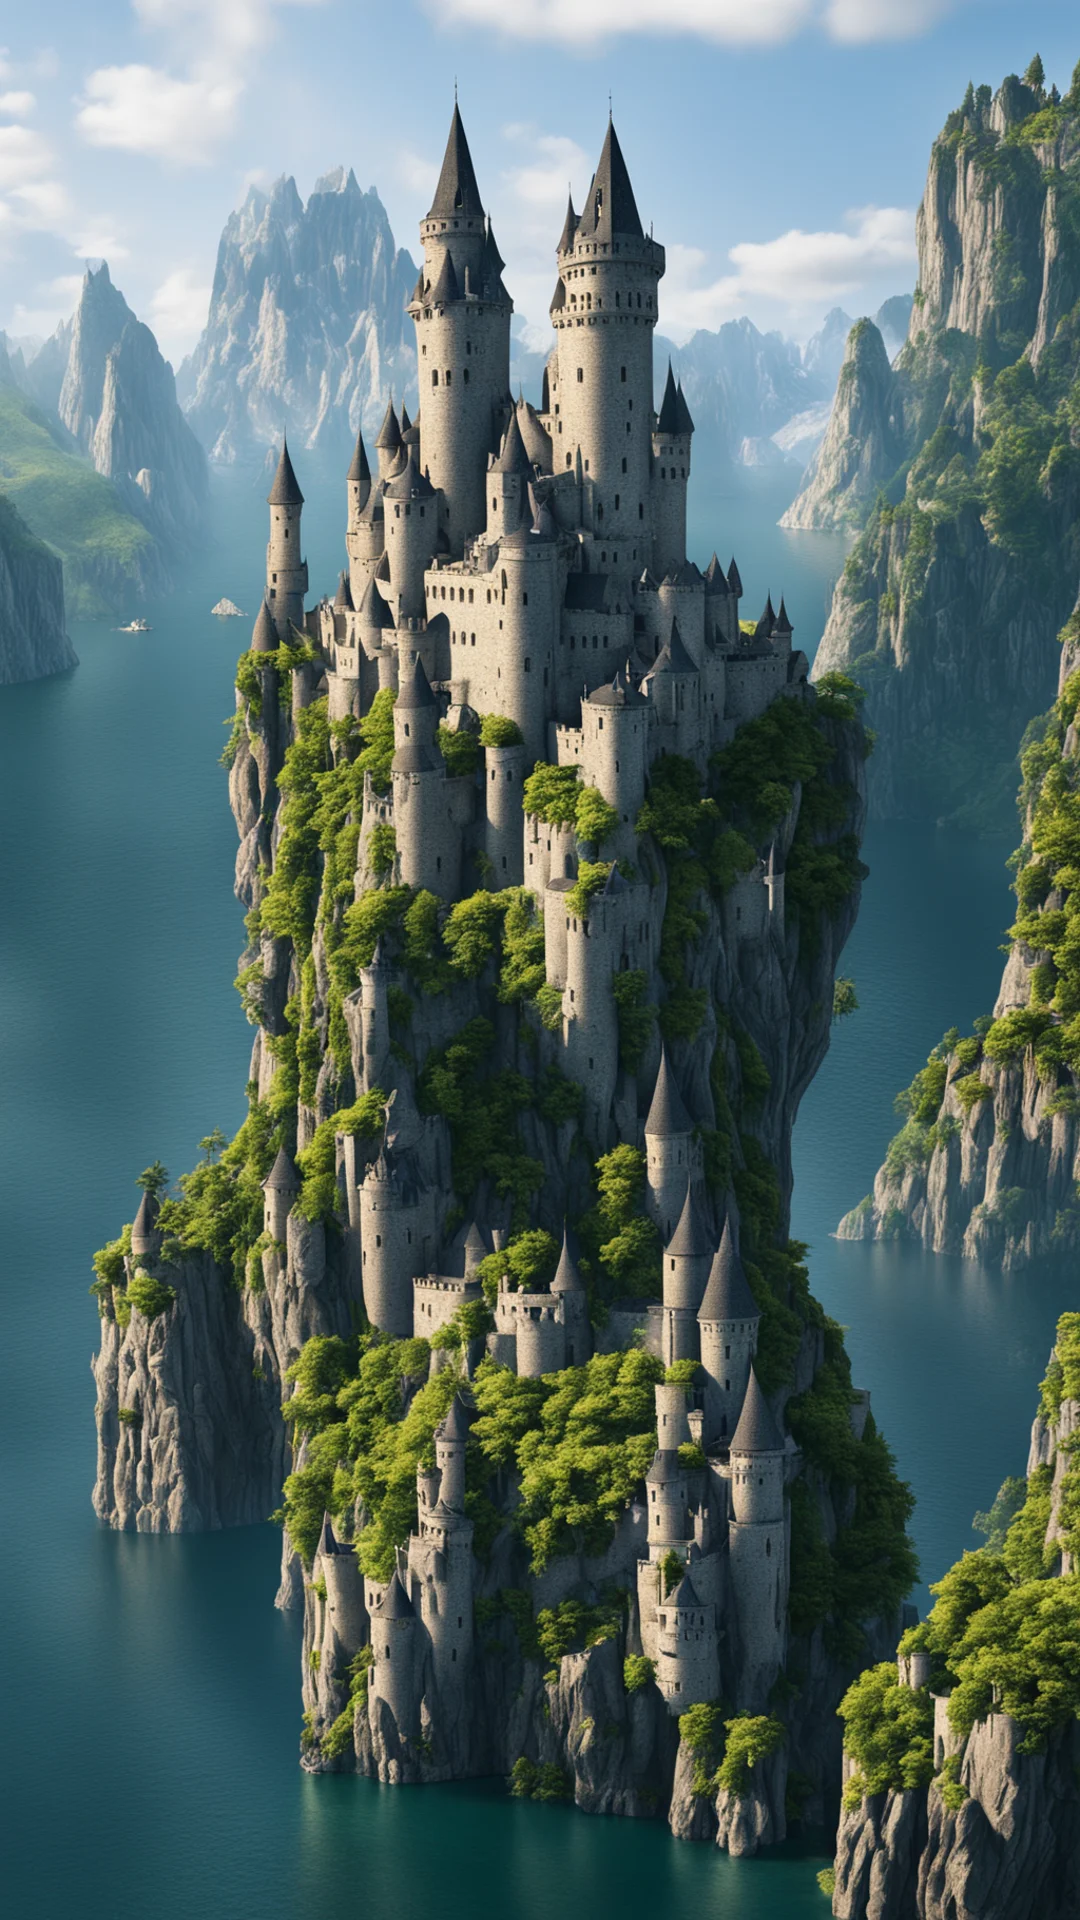 epic cliffs castle over lake large spiraling towers on castle epic shot realistic amazing awesome portrait 2 tall